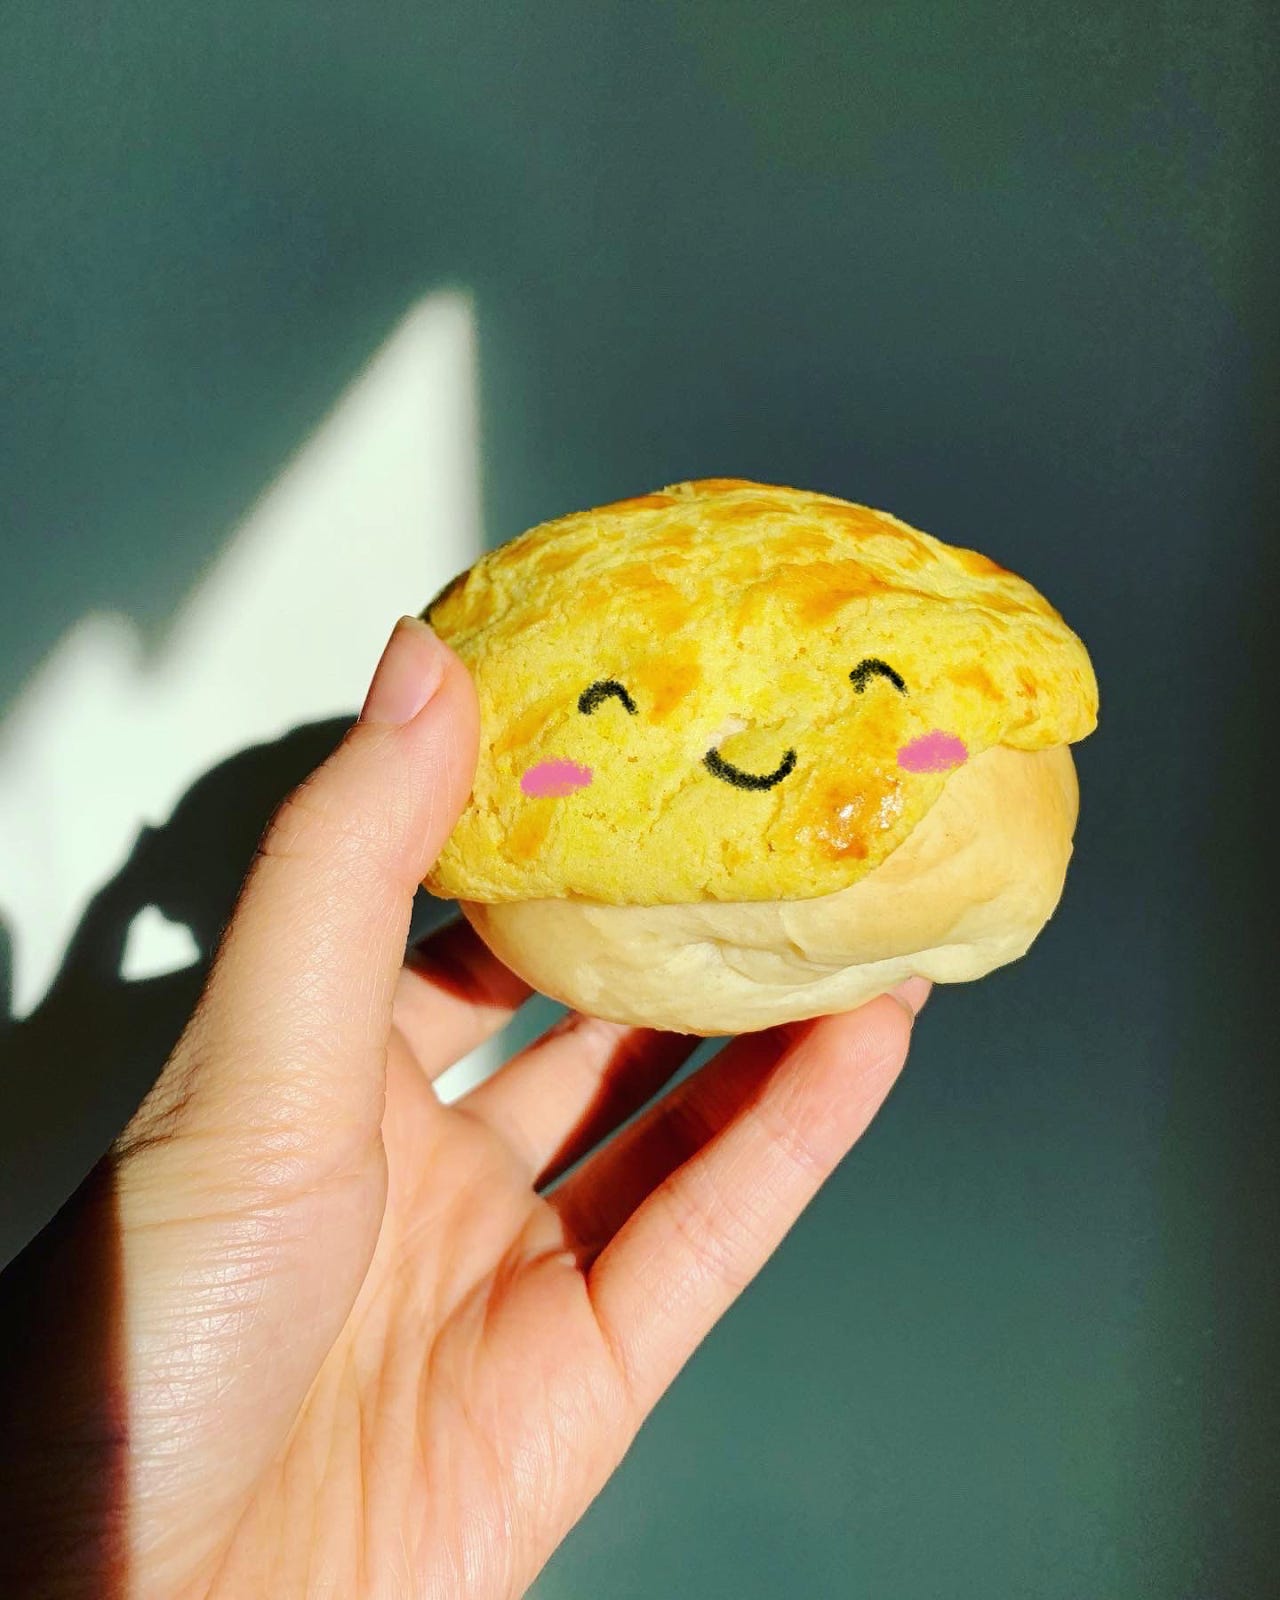 One thing I ate: Pineapple buns!🍍 - by Sophie Chou